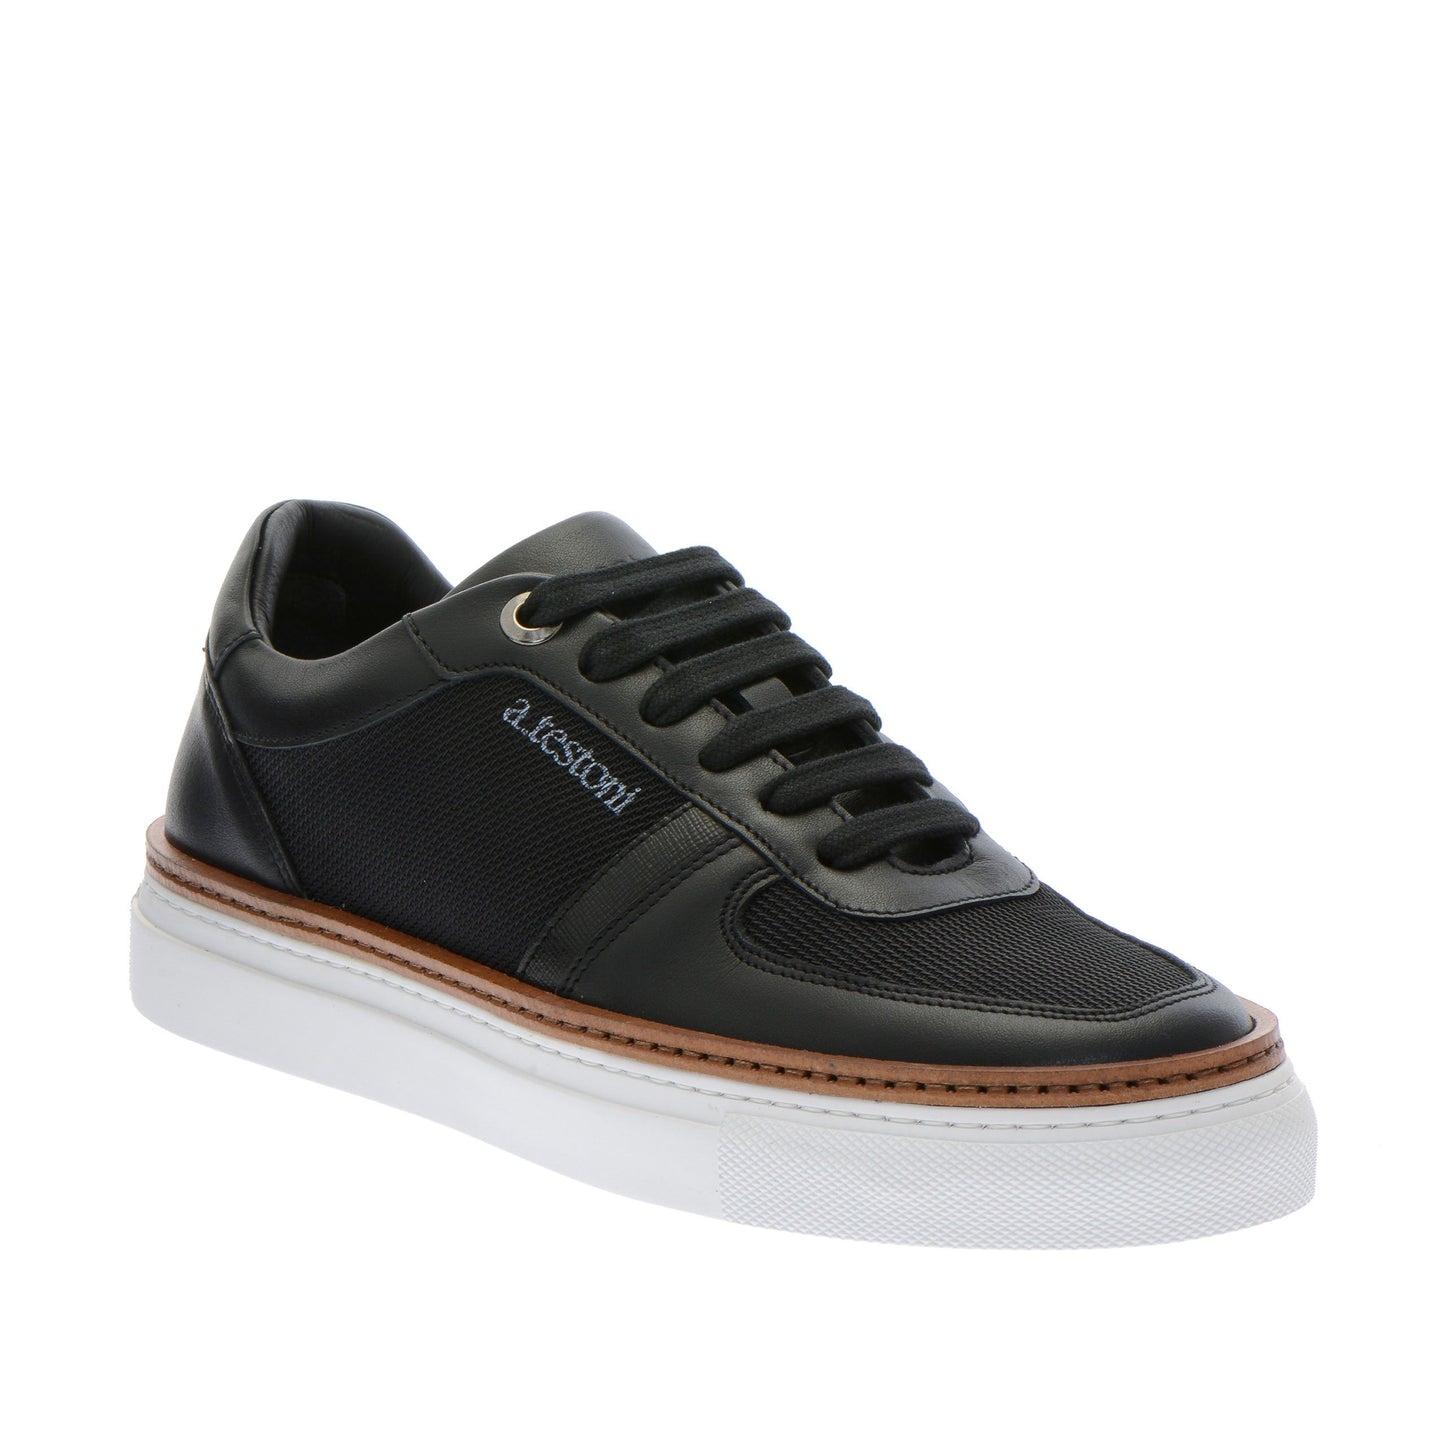 Chic Calf Leather Sneakers with Saffiano Accents